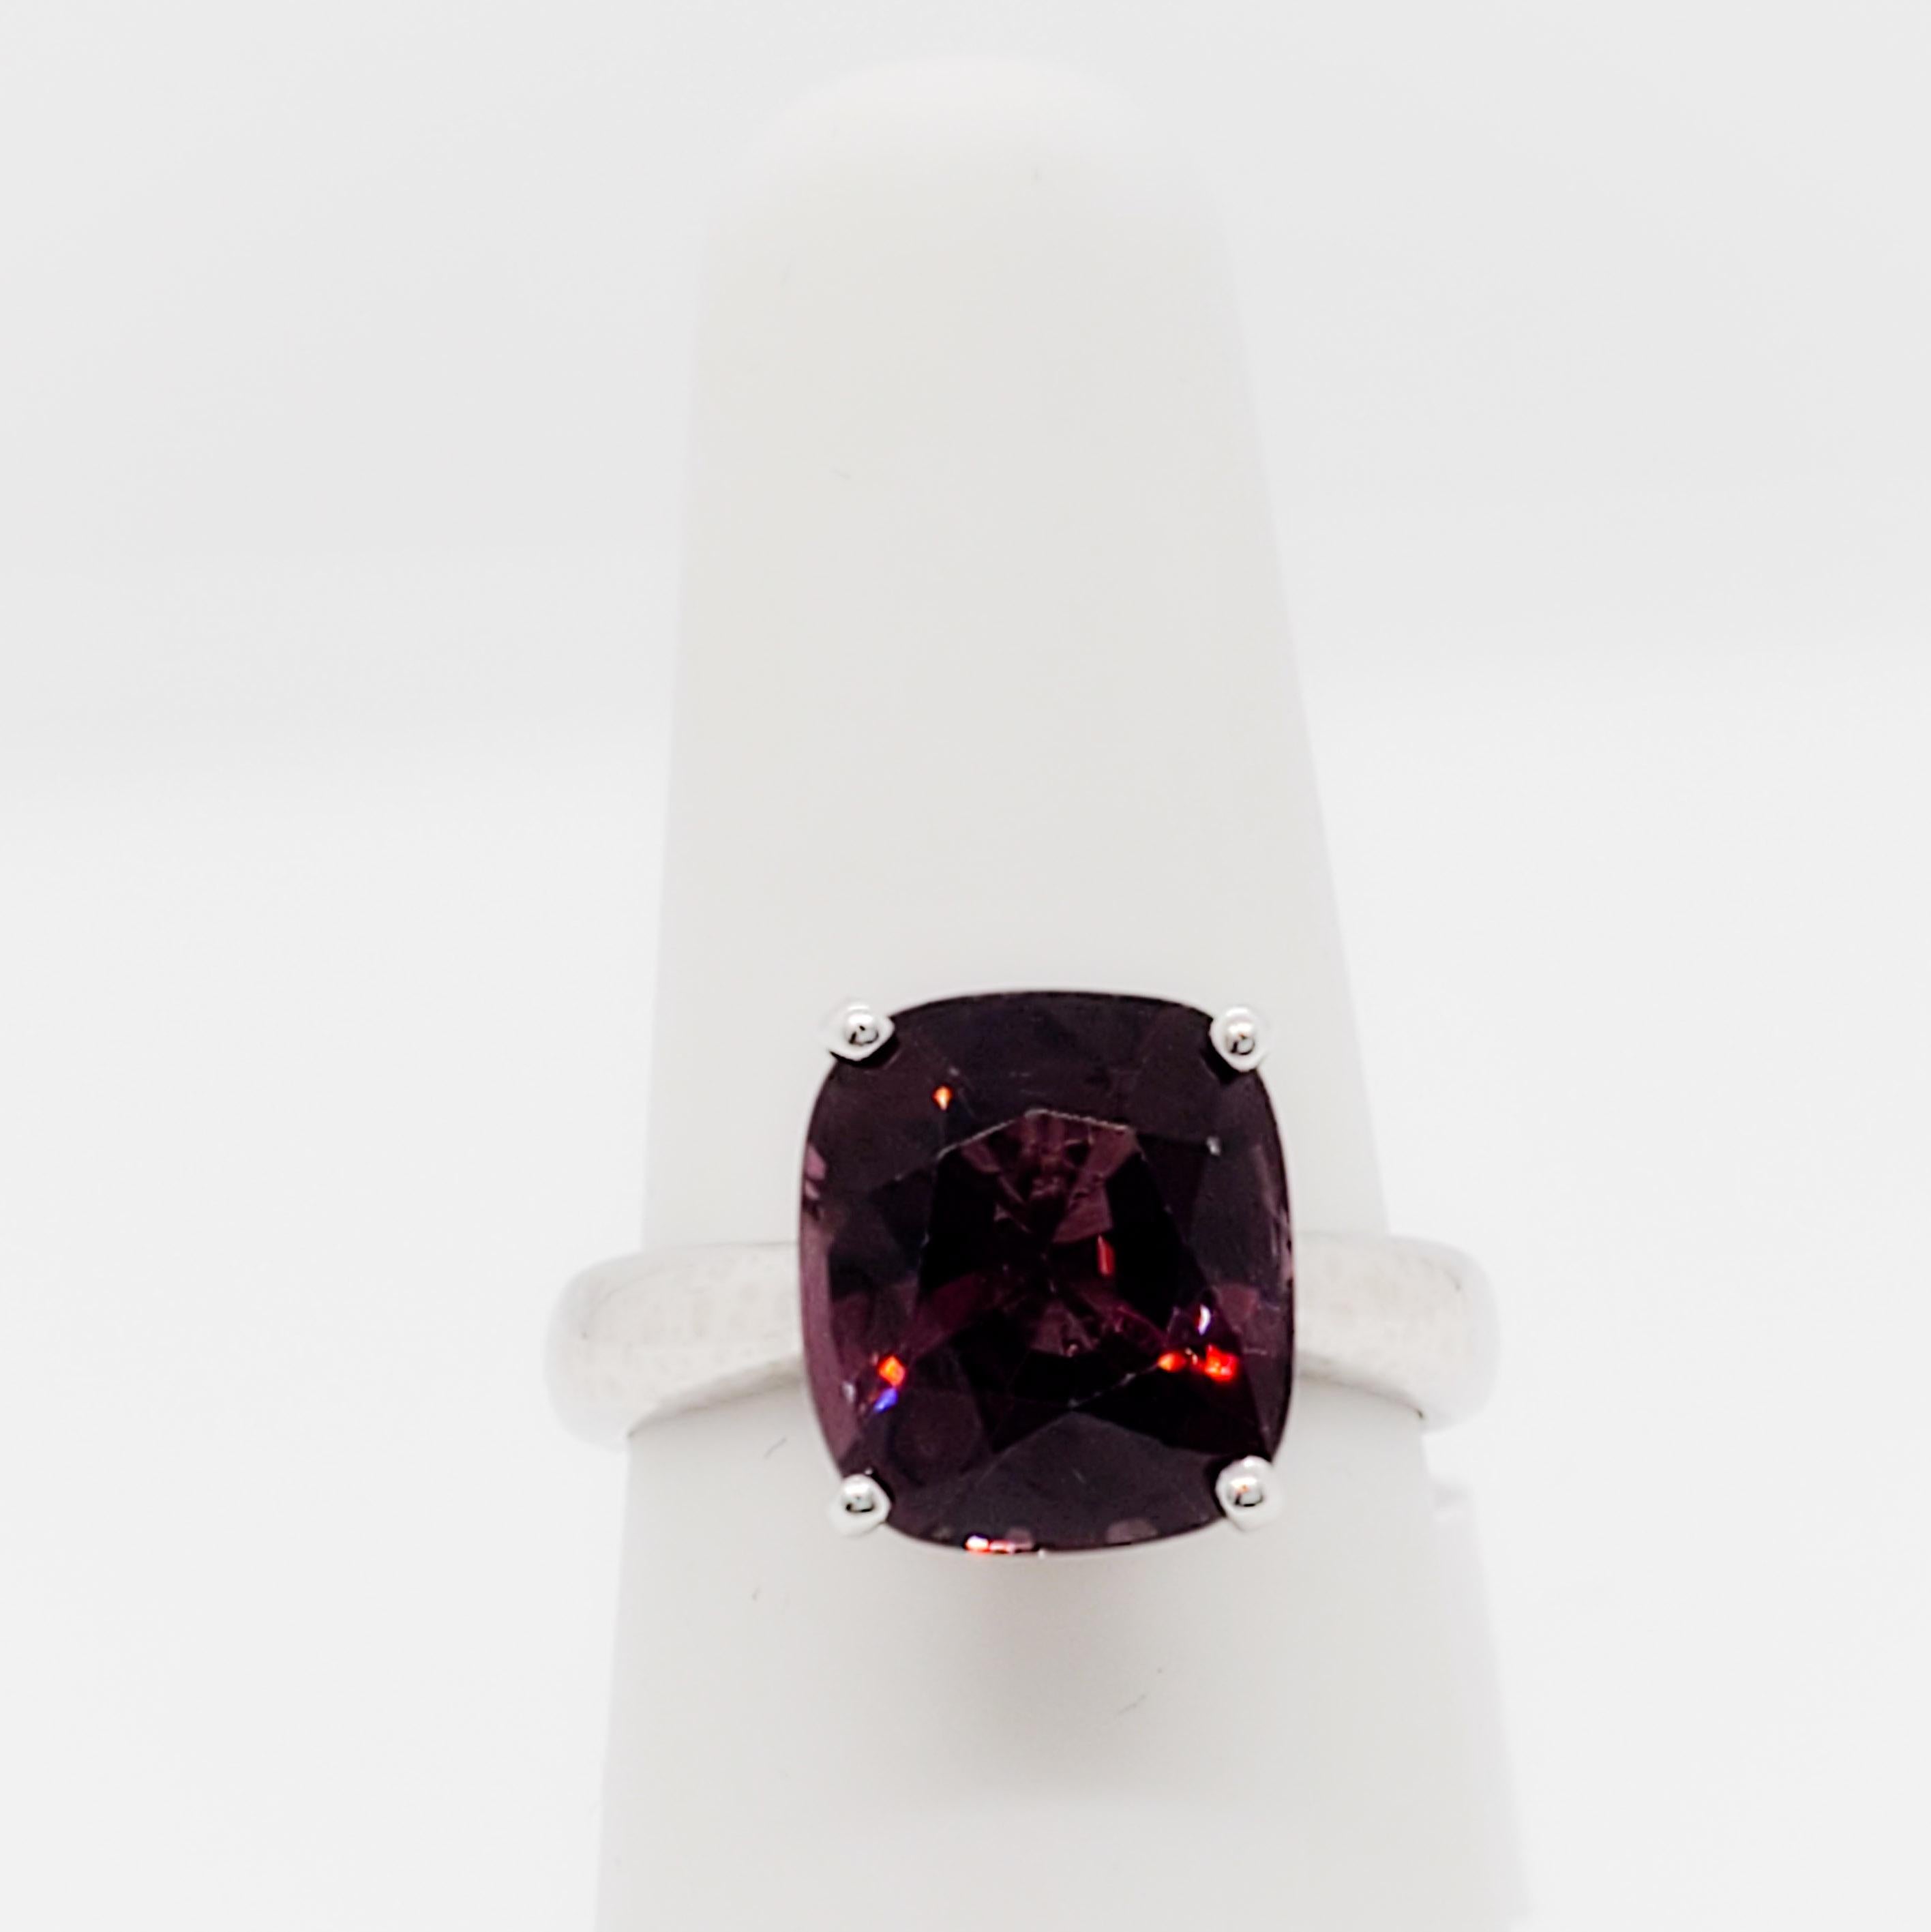 Cushion Cut Estate Red Spinel Solitaire Ring in 14k White Gold